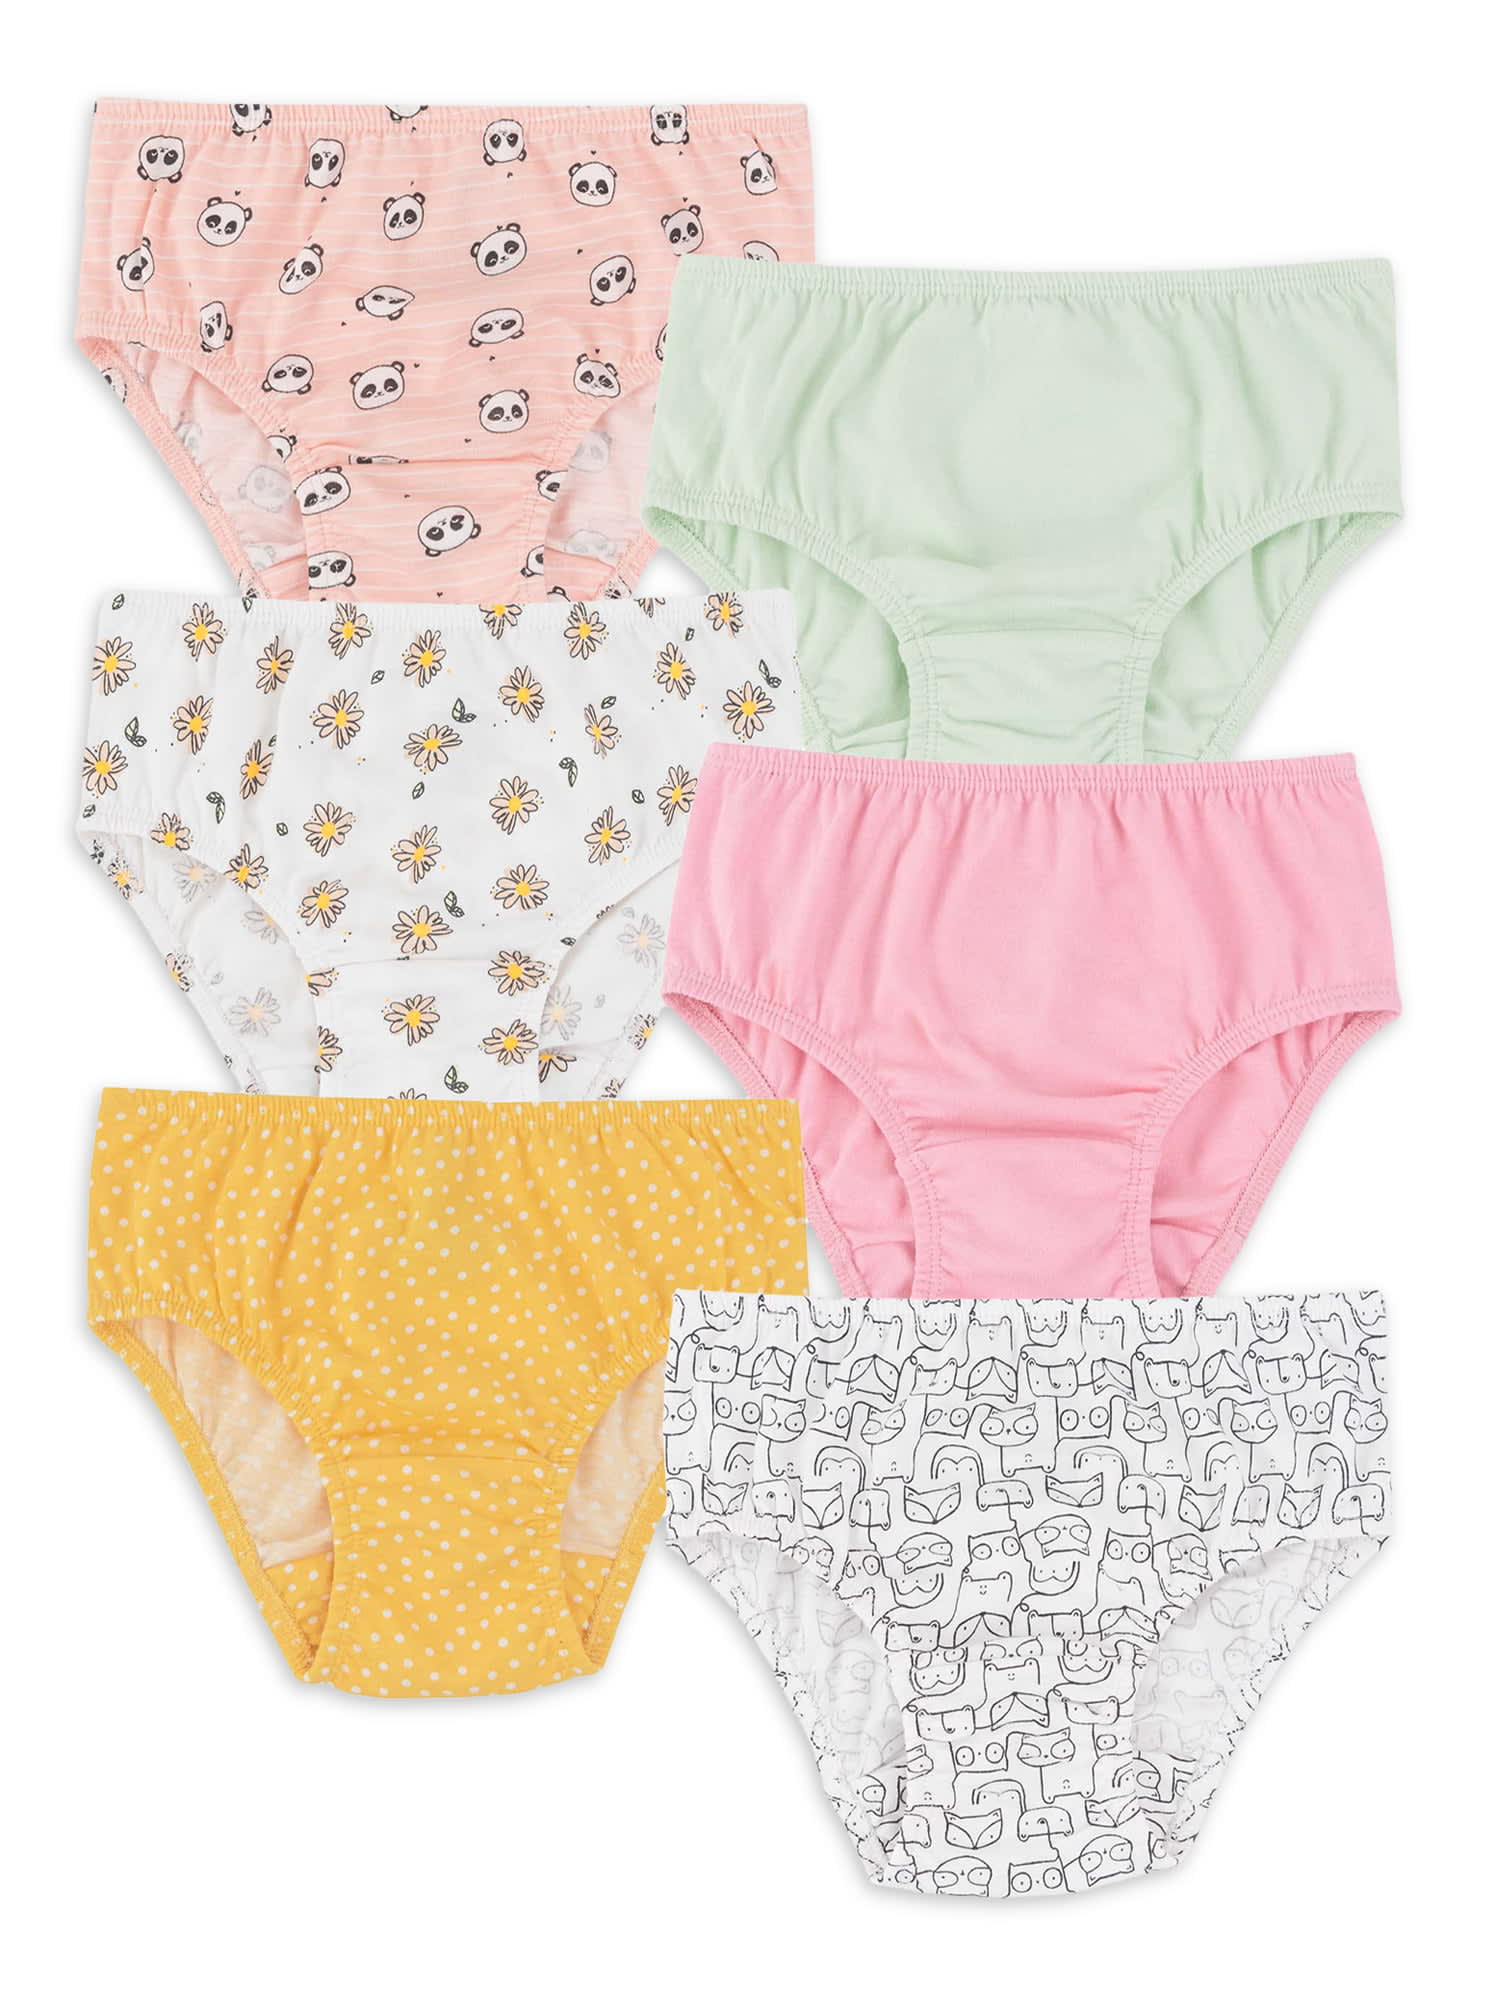 Wonder Nation Toddler Girls Briefs, 6-Pack, Sizes 2T-5T - DroneUp Delivery